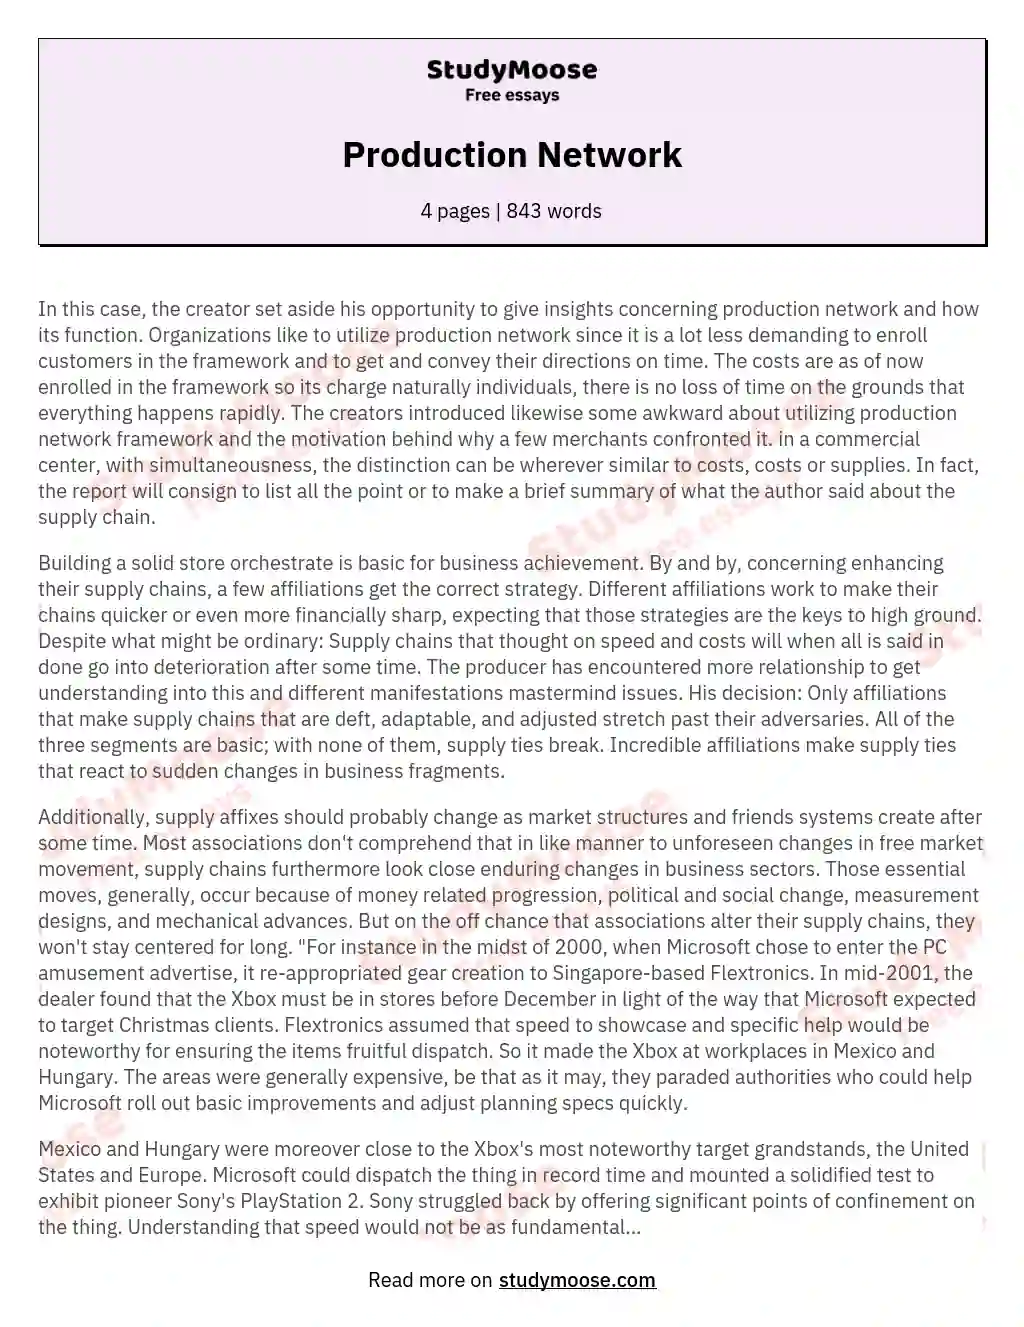 Production Network essay